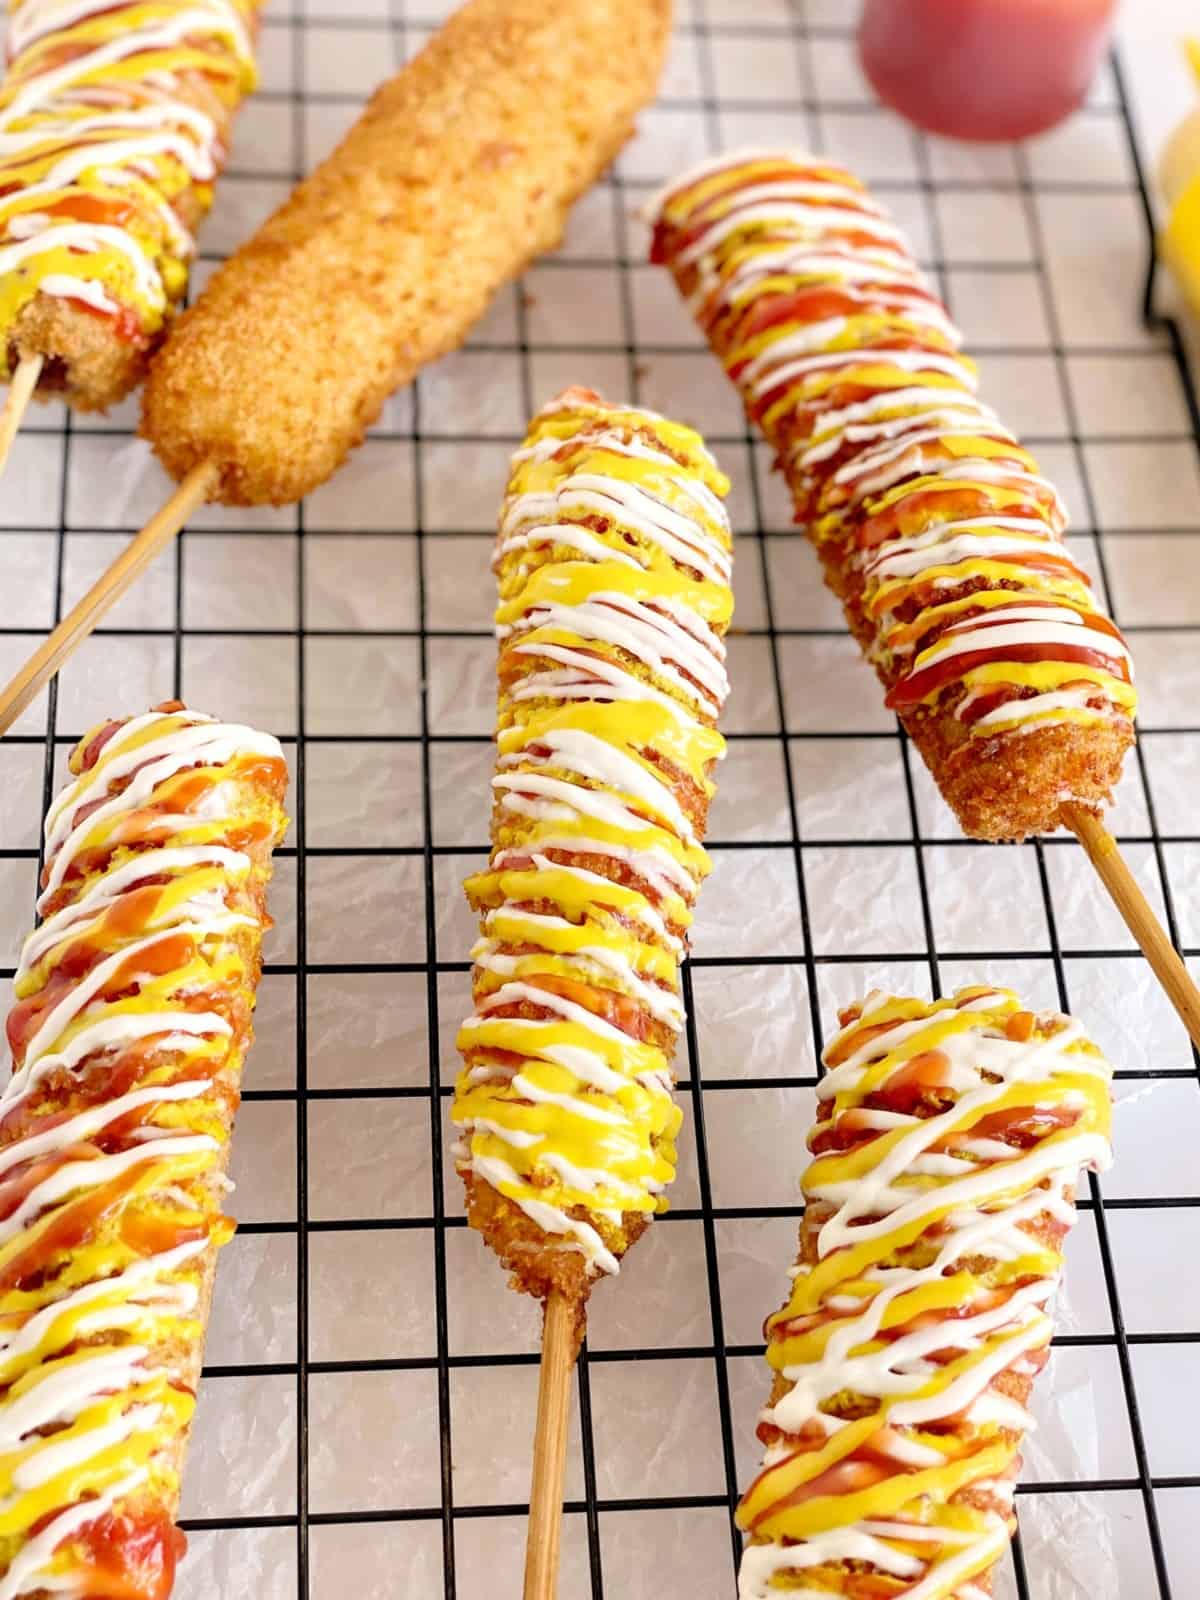 korean corn dogs with mustard and ketchup on a wire rack